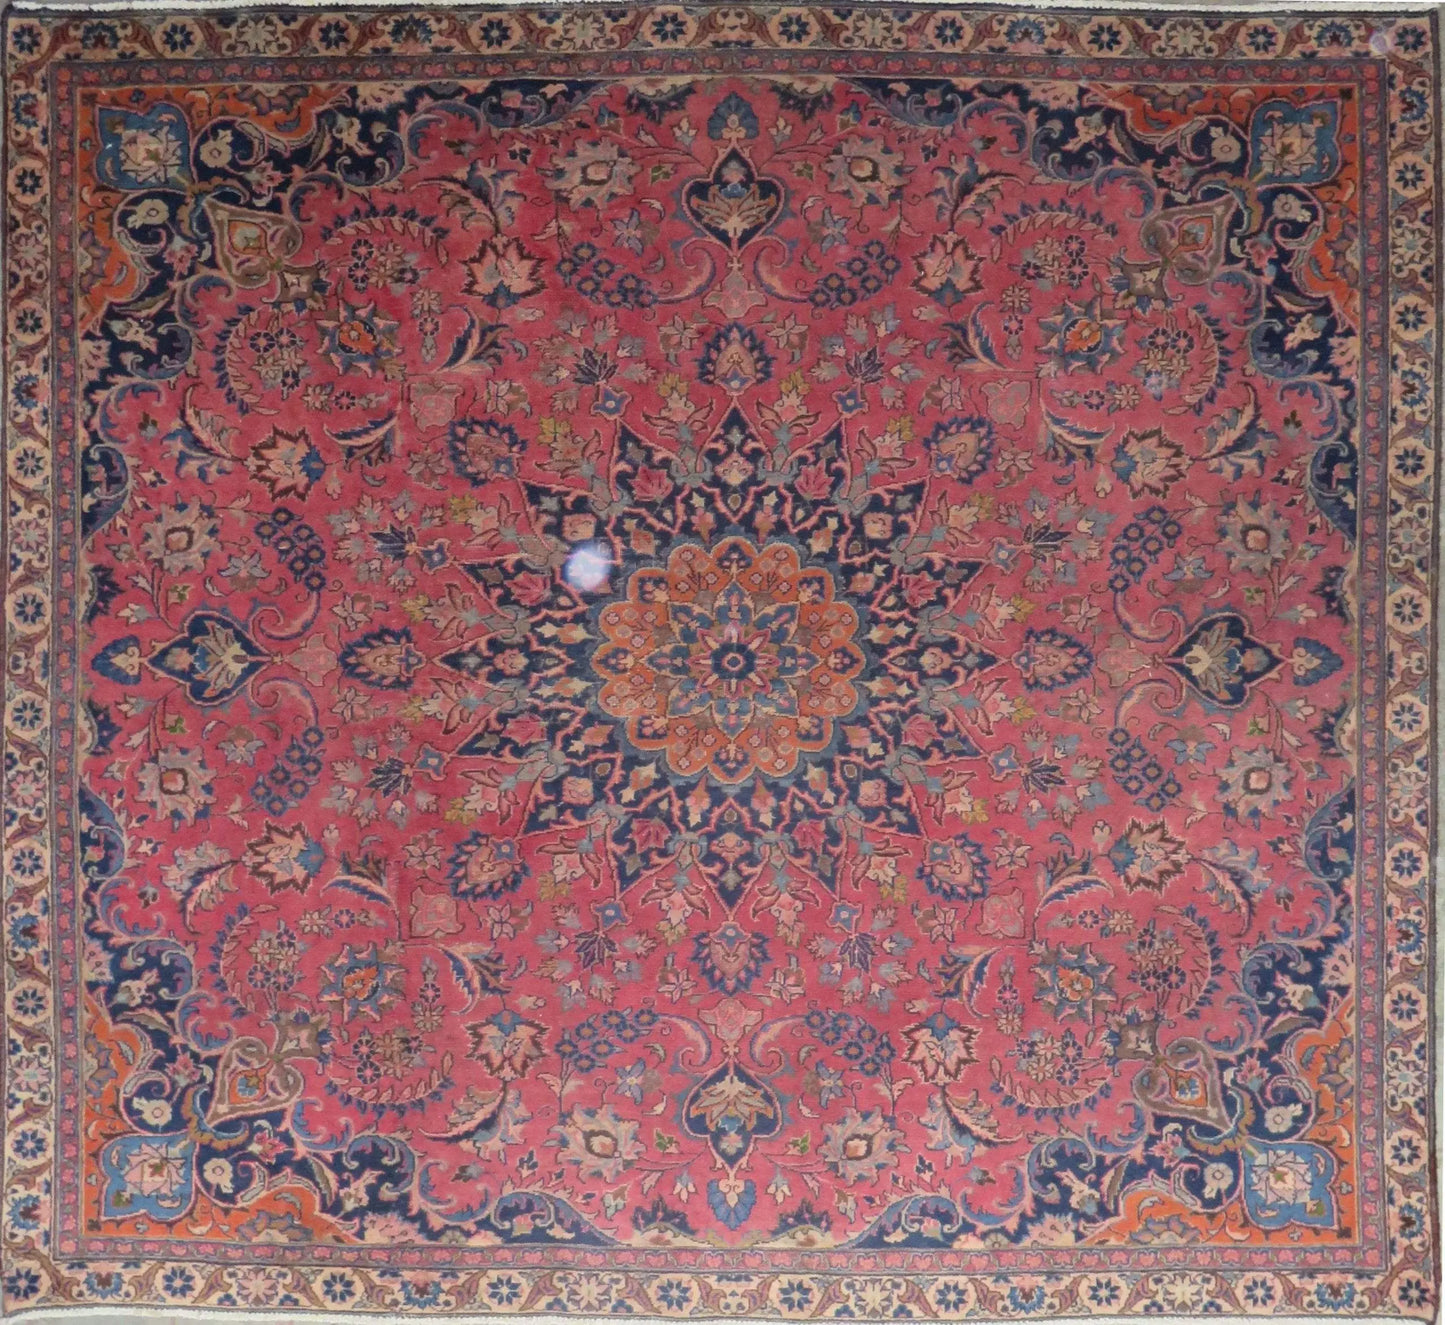 Hand-Knotted Persian Wool Rug _ Luxurious Vintage Design, 7'5" x 6'8", Artisan Crafted